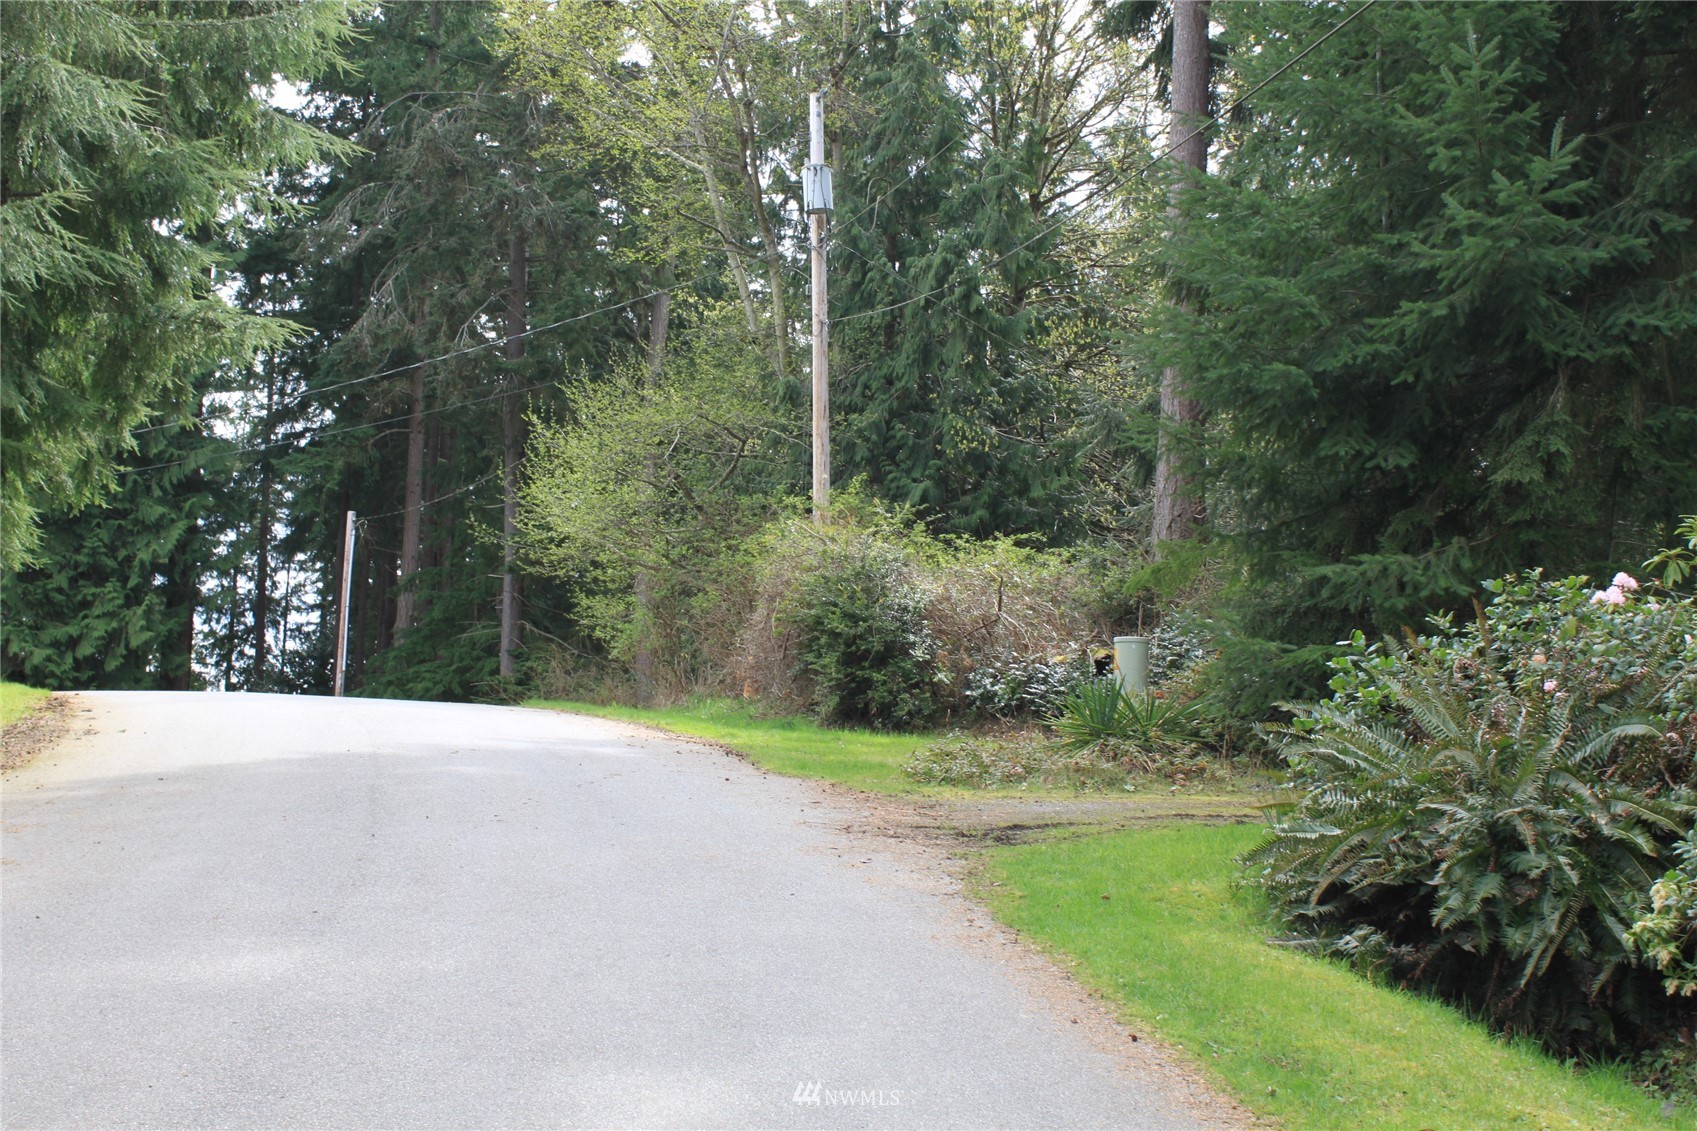 a view of a road with trees and bushes